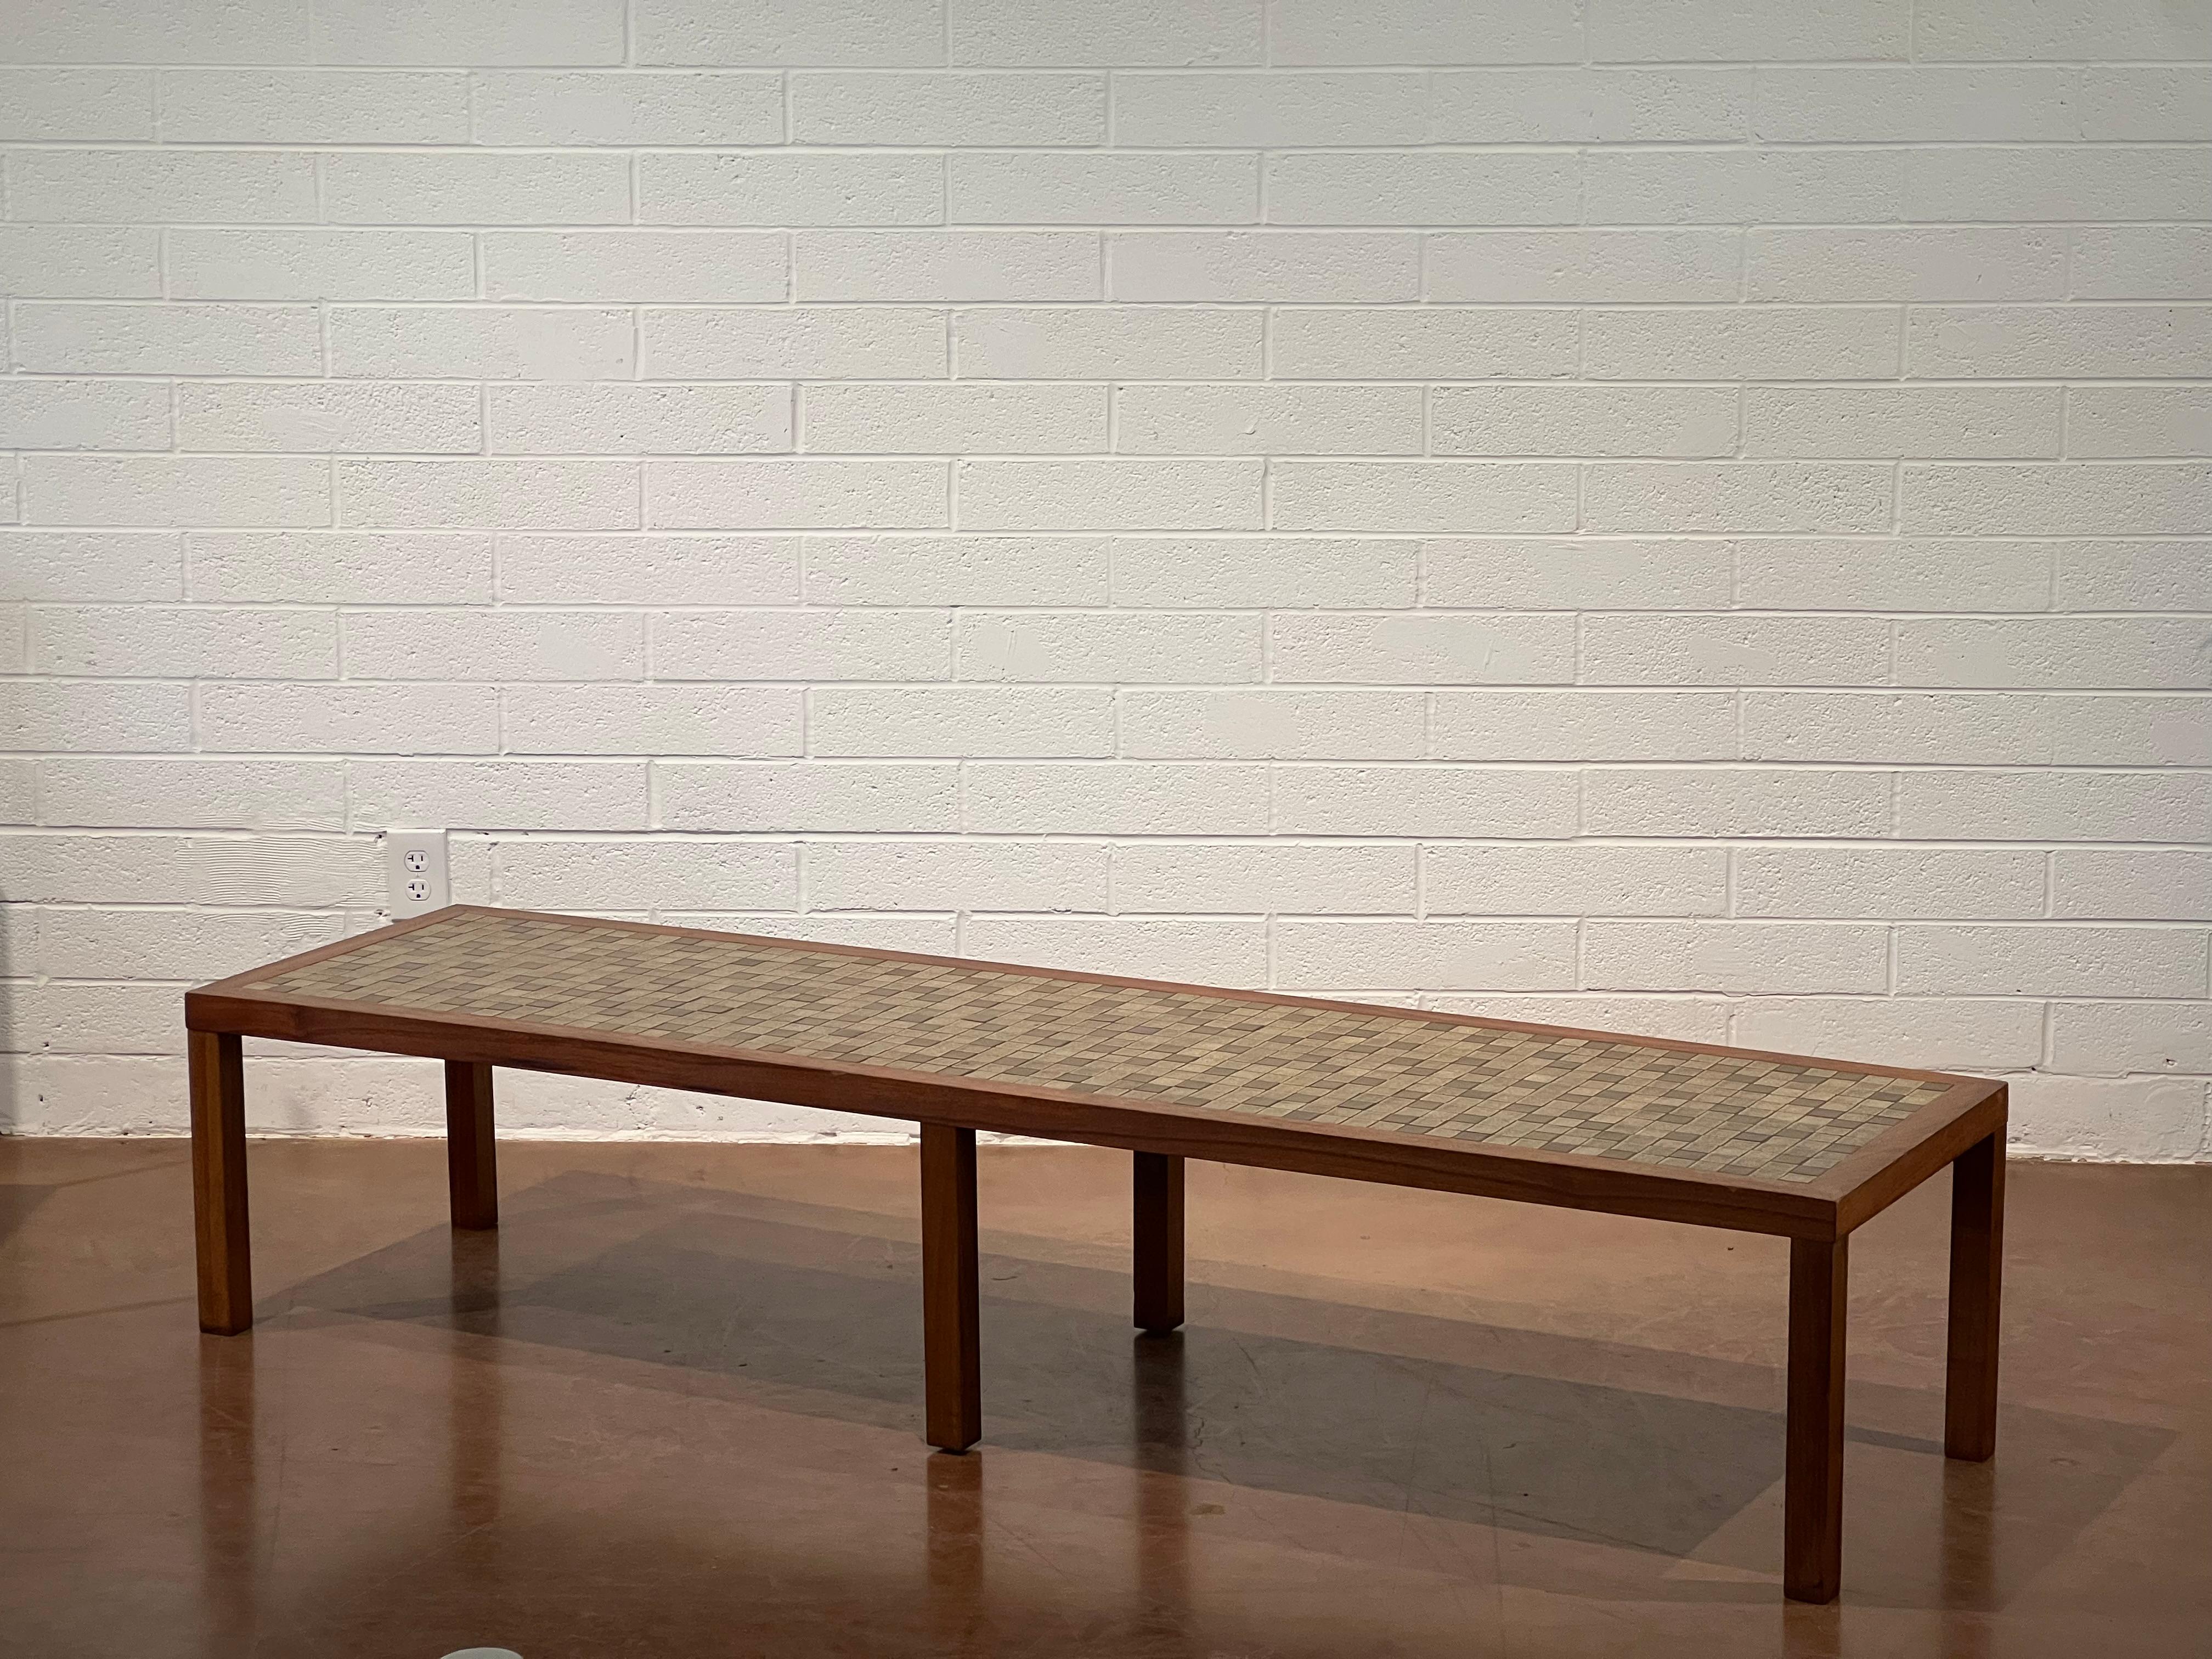 Extra long rectangle coffee table by Gordon and Jane Martz for Marshall Studios. The table top is inlaid with olive and taupe square ceramic tiles and the frame and legs are solid walnut. It is in great condition with very minimal wear. 